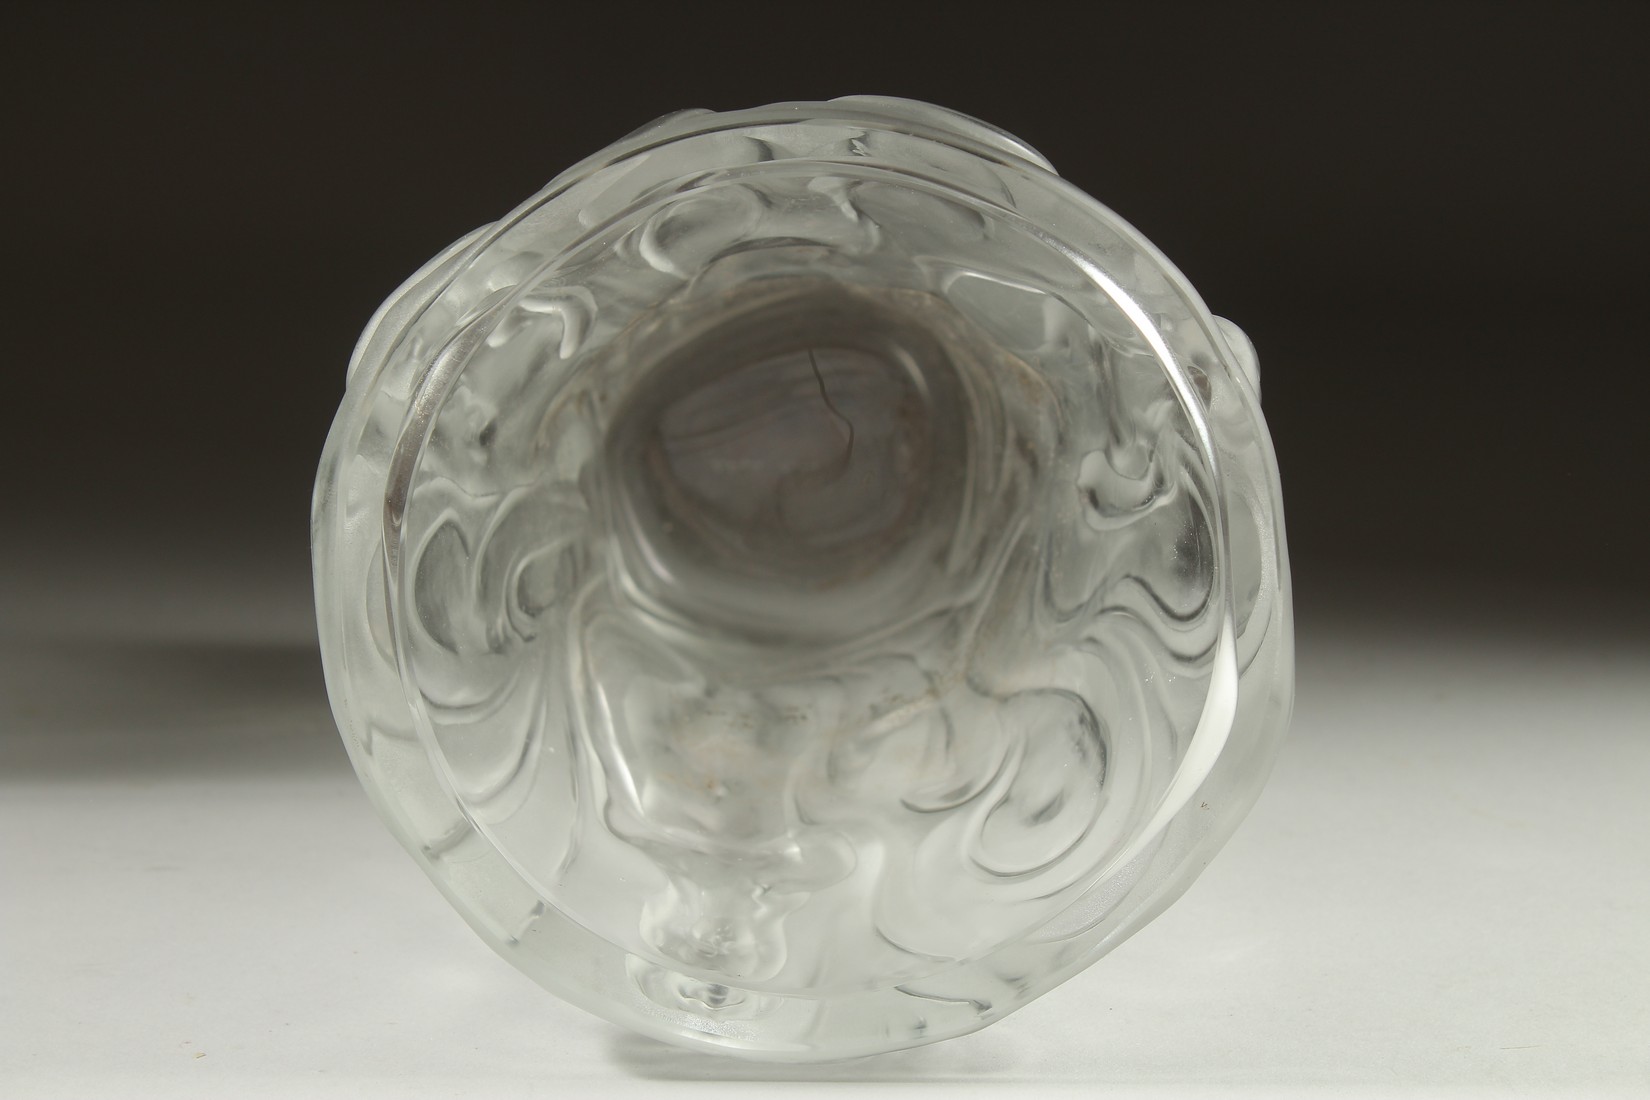 A GOOD LALIQUE FROSTED GLASS VASE the sides with nudes. Engraved: Lalique,France. 8.5ins high. - Image 4 of 6